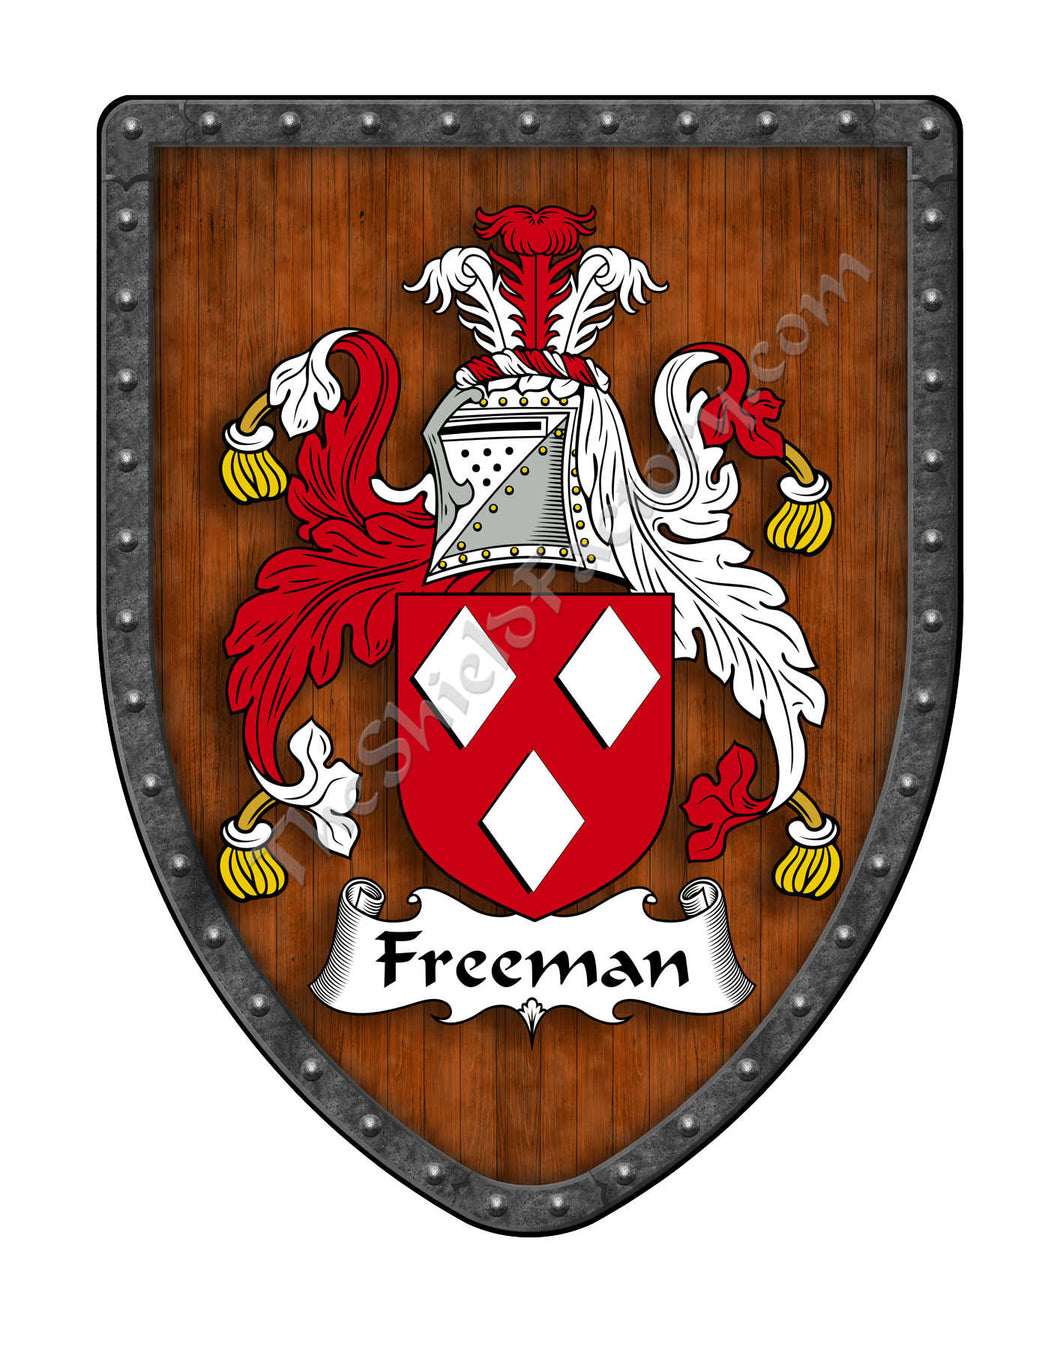 Freeman Coat of Arms Family Crest